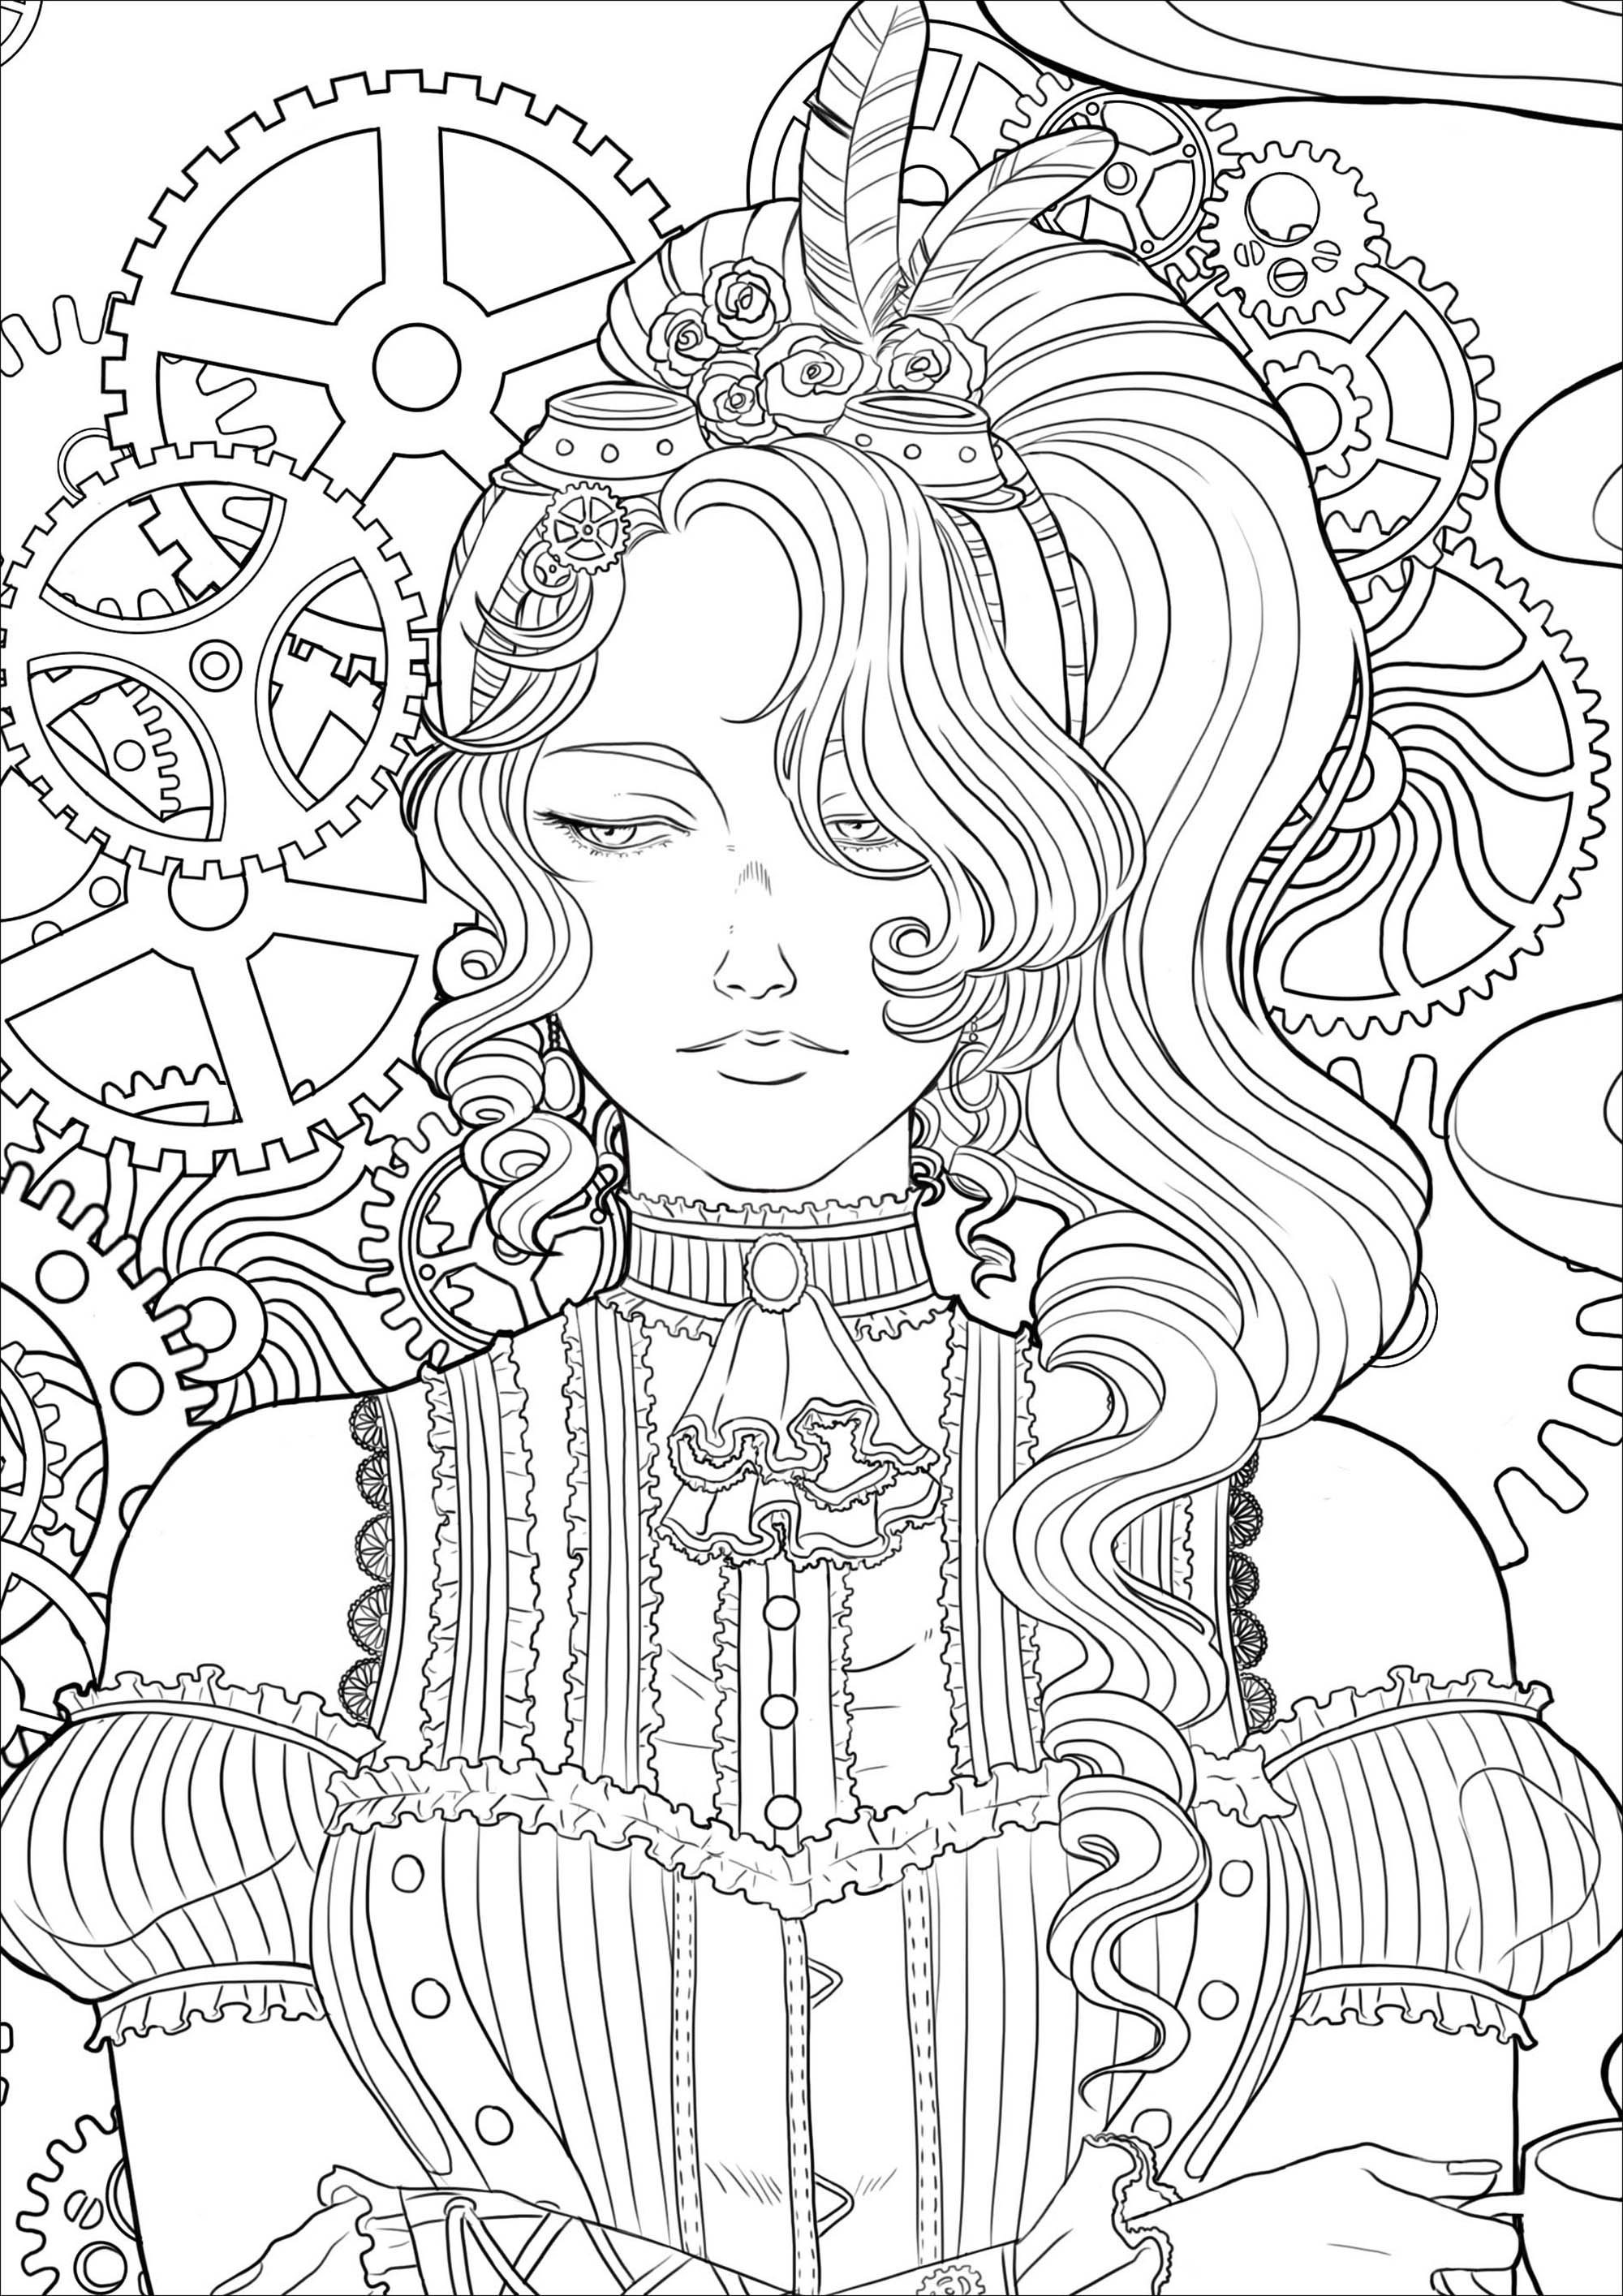 Coloring page of a melancholy young woman with a cup of tea, all in a Victorian environment and mechanisms. Version 3, Artist : Lestat Hallward Holmes